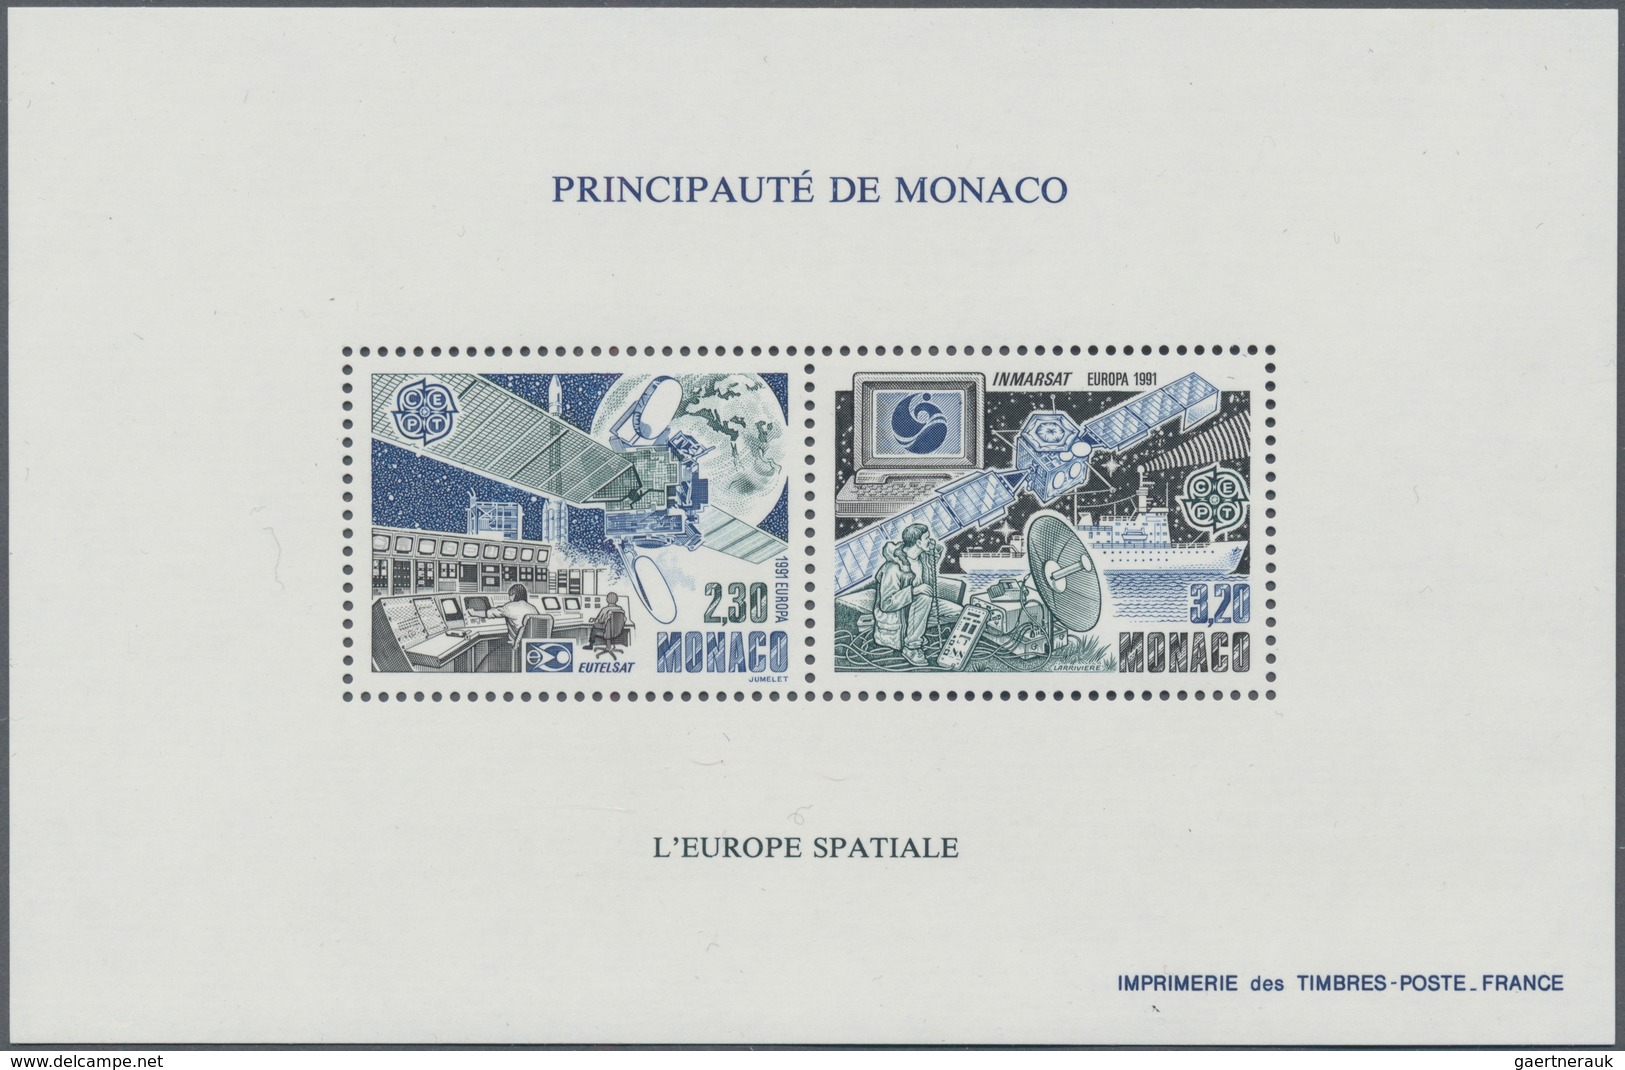 Monaco: 1991, Cept "Space", Bloc Speciaux Perforated, 100 Pieces Mint Never Hinged. Yvert BS 14, Cat - Neufs